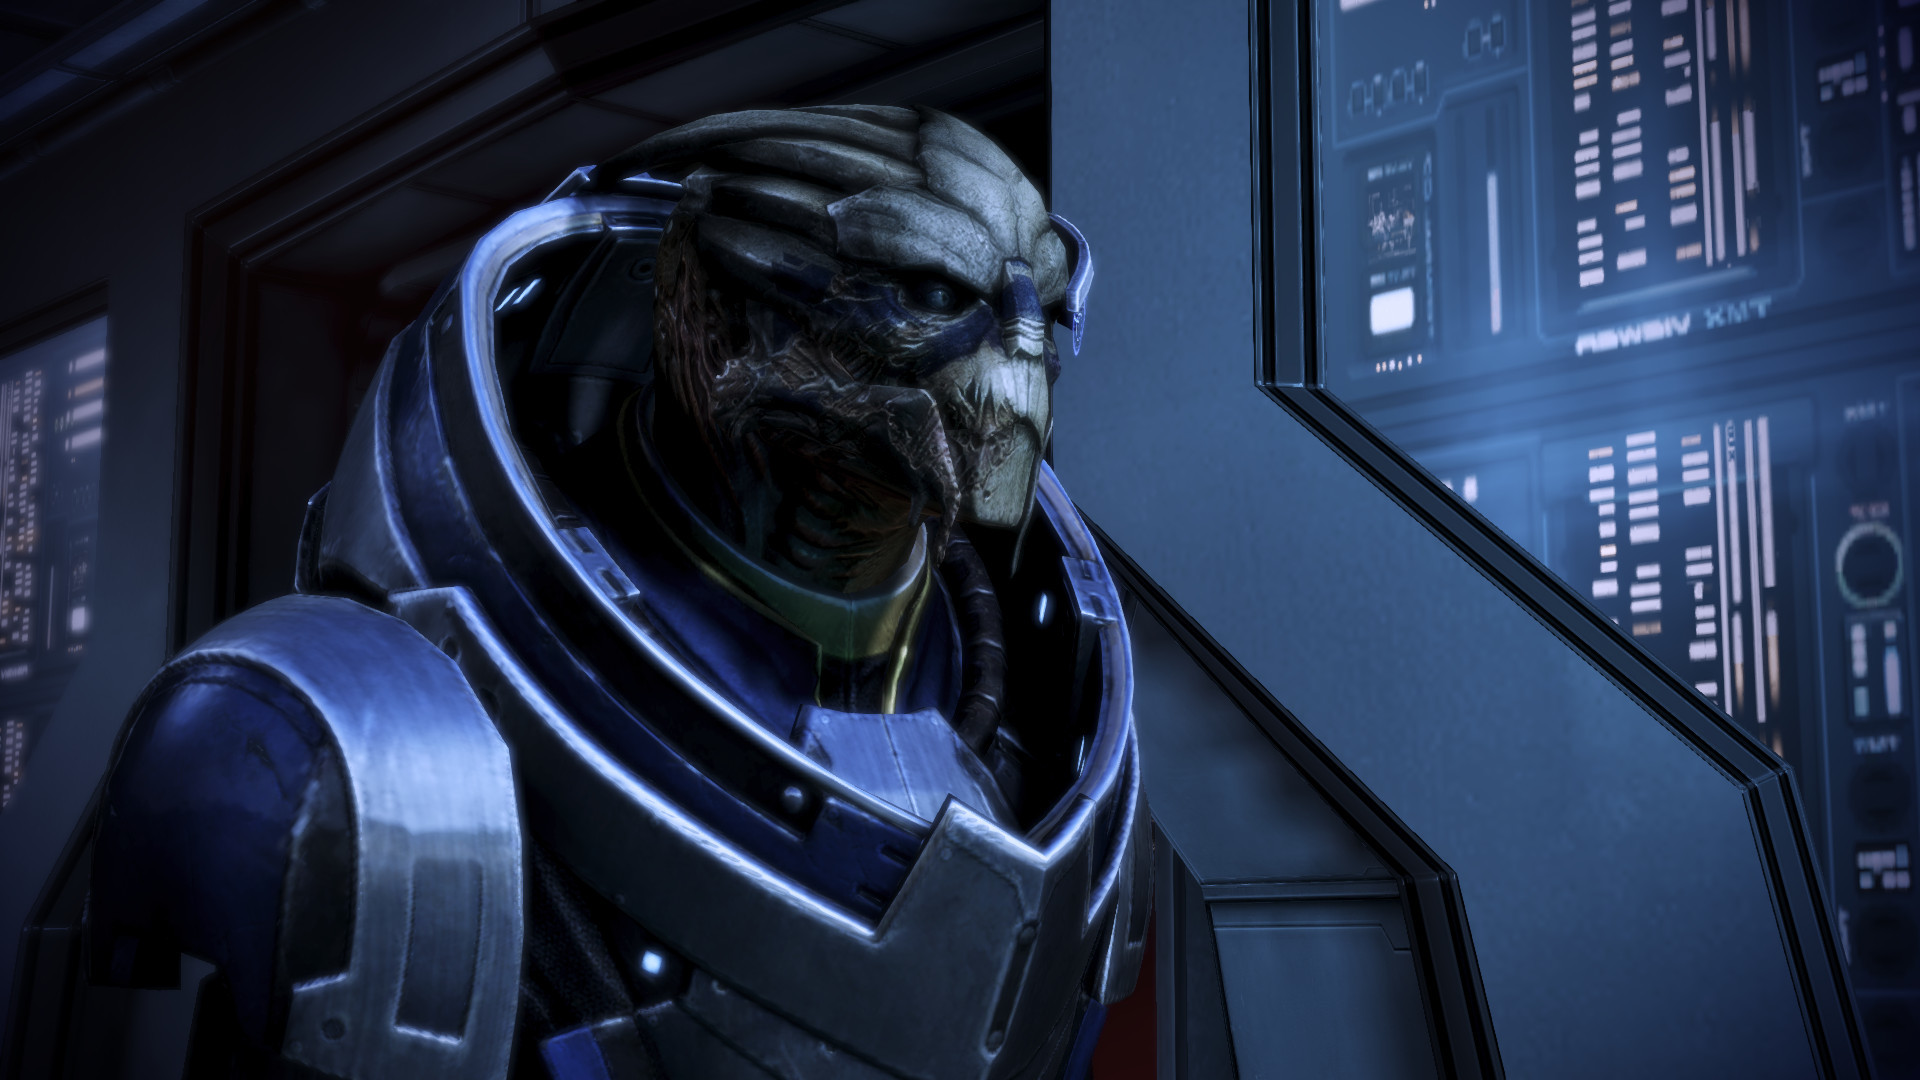 1920x1080 Background In High Quality - Garrus Vakarian by Ahriman Baroch